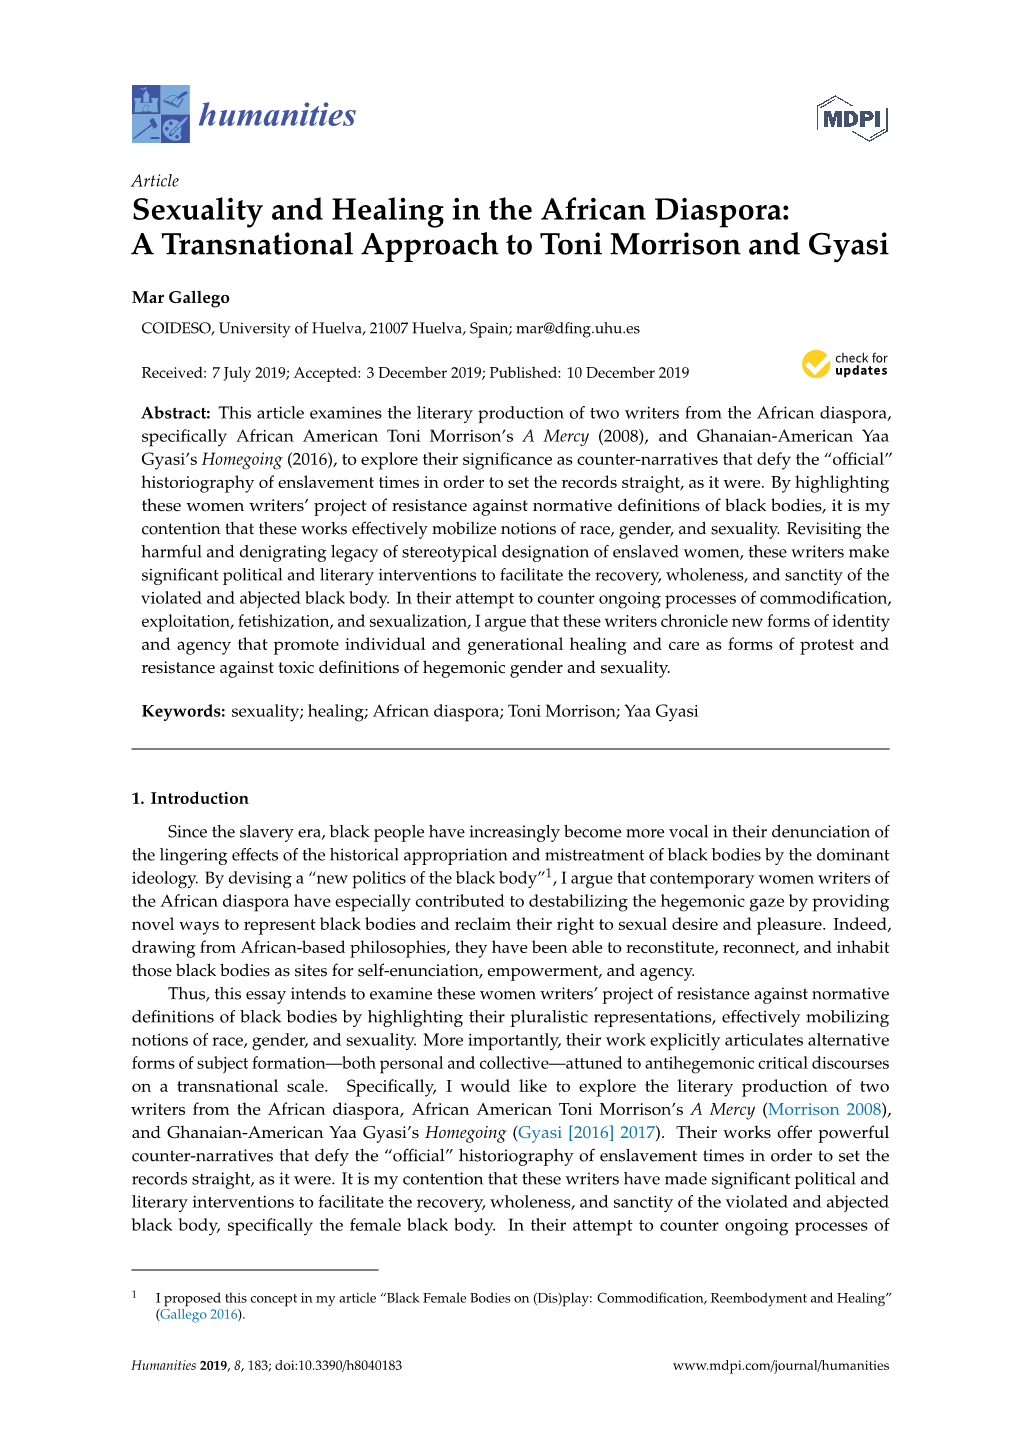 Sexuality and Healing in the African Diaspora: a Transnational Approach to Toni Morrison and Gyasi